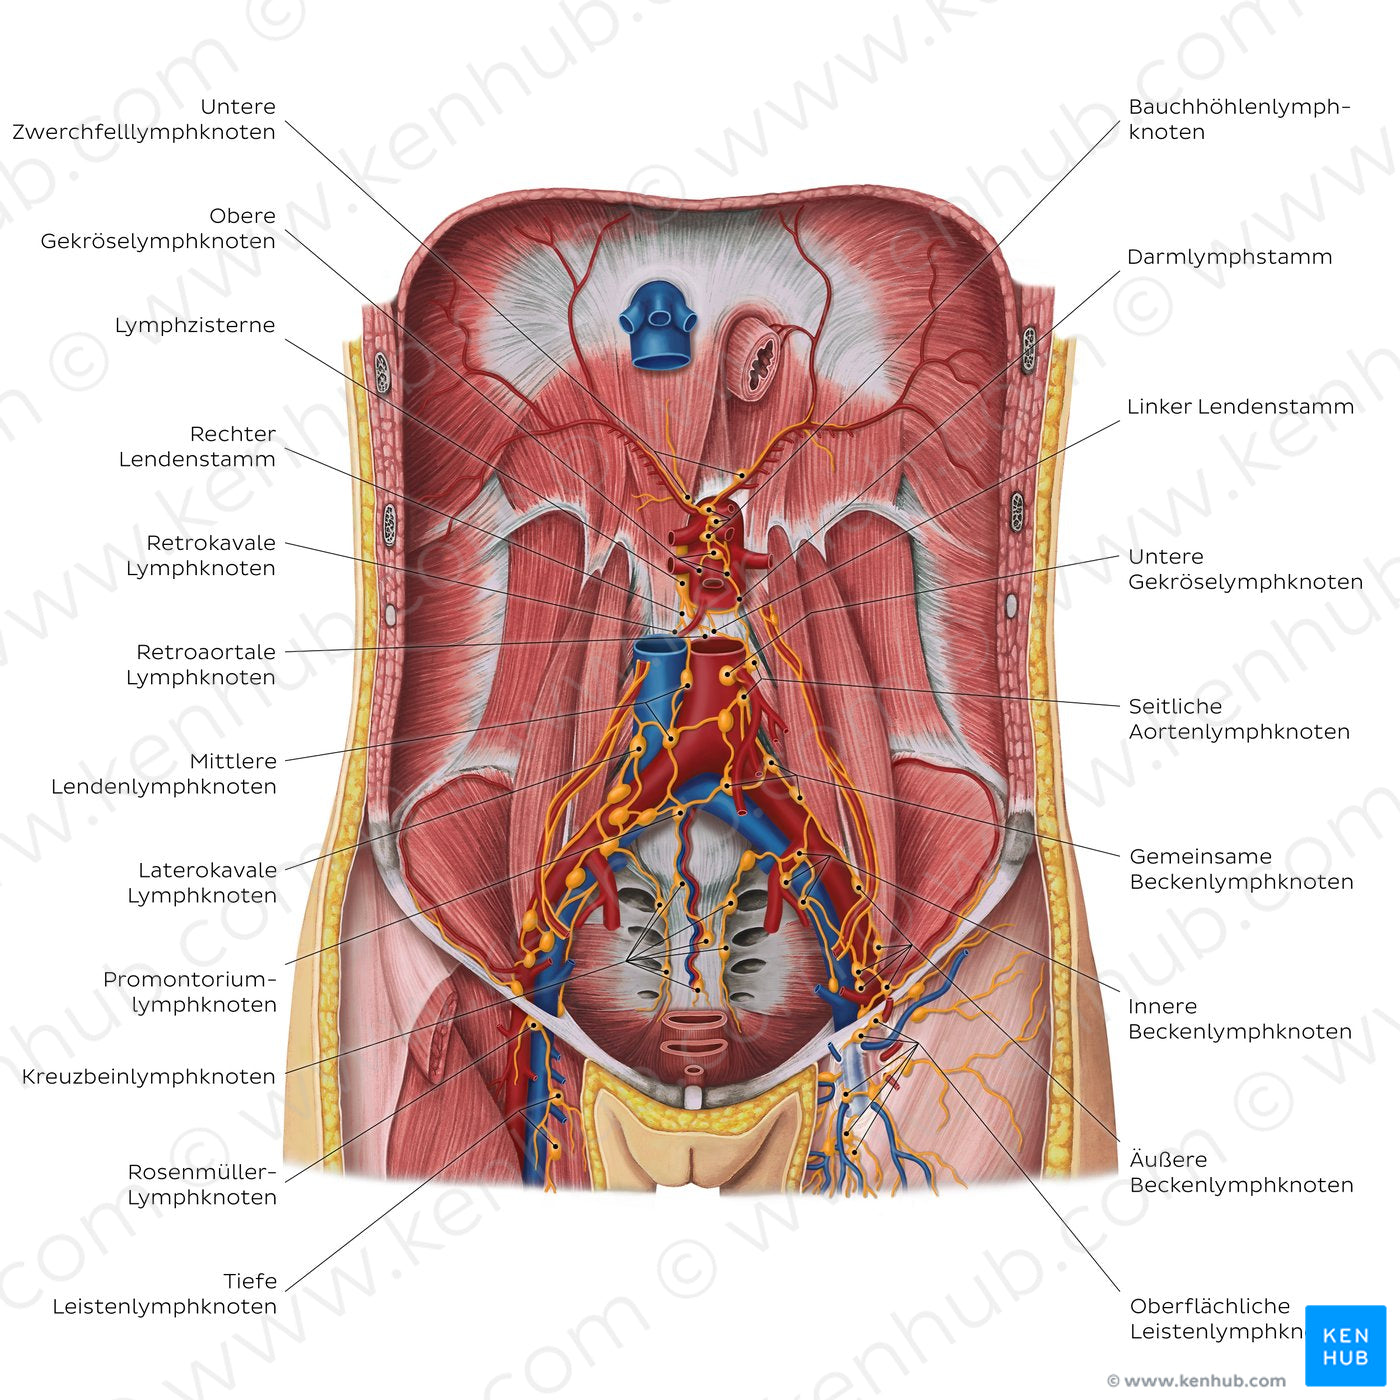 Lymphatics of the posterior abdominal wall (German)